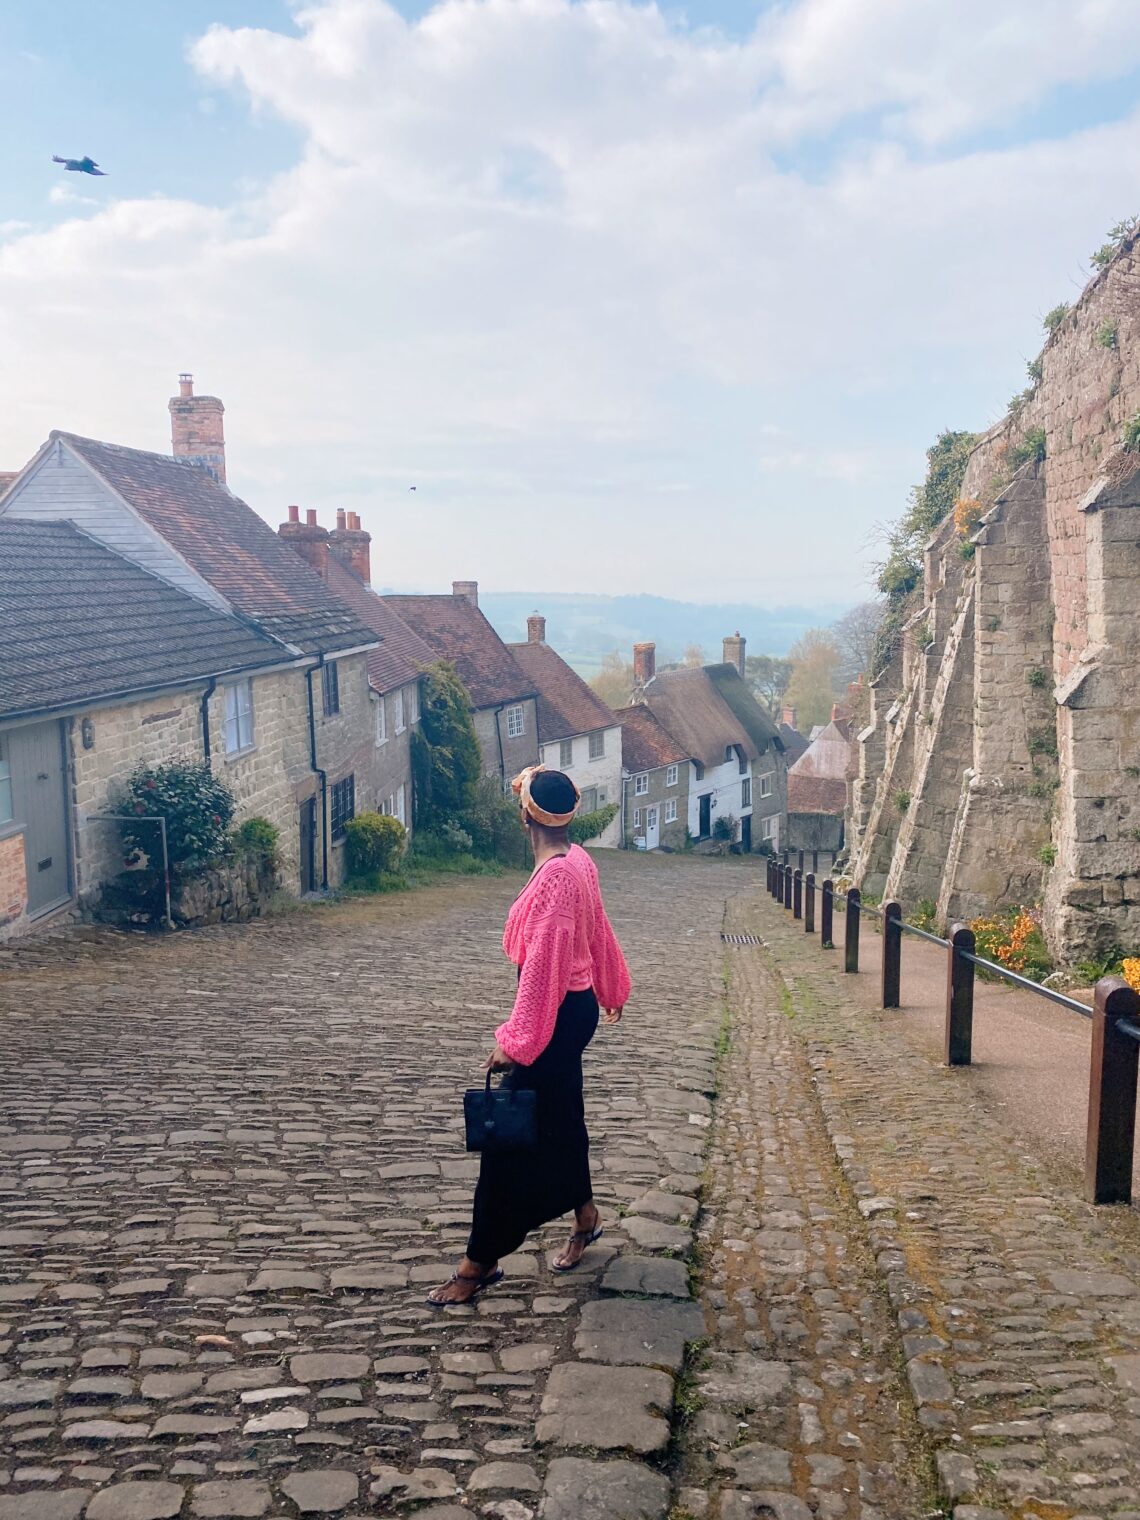 Gold Hill - What to do in Shaftesbury, Dorset - lifewithbugo